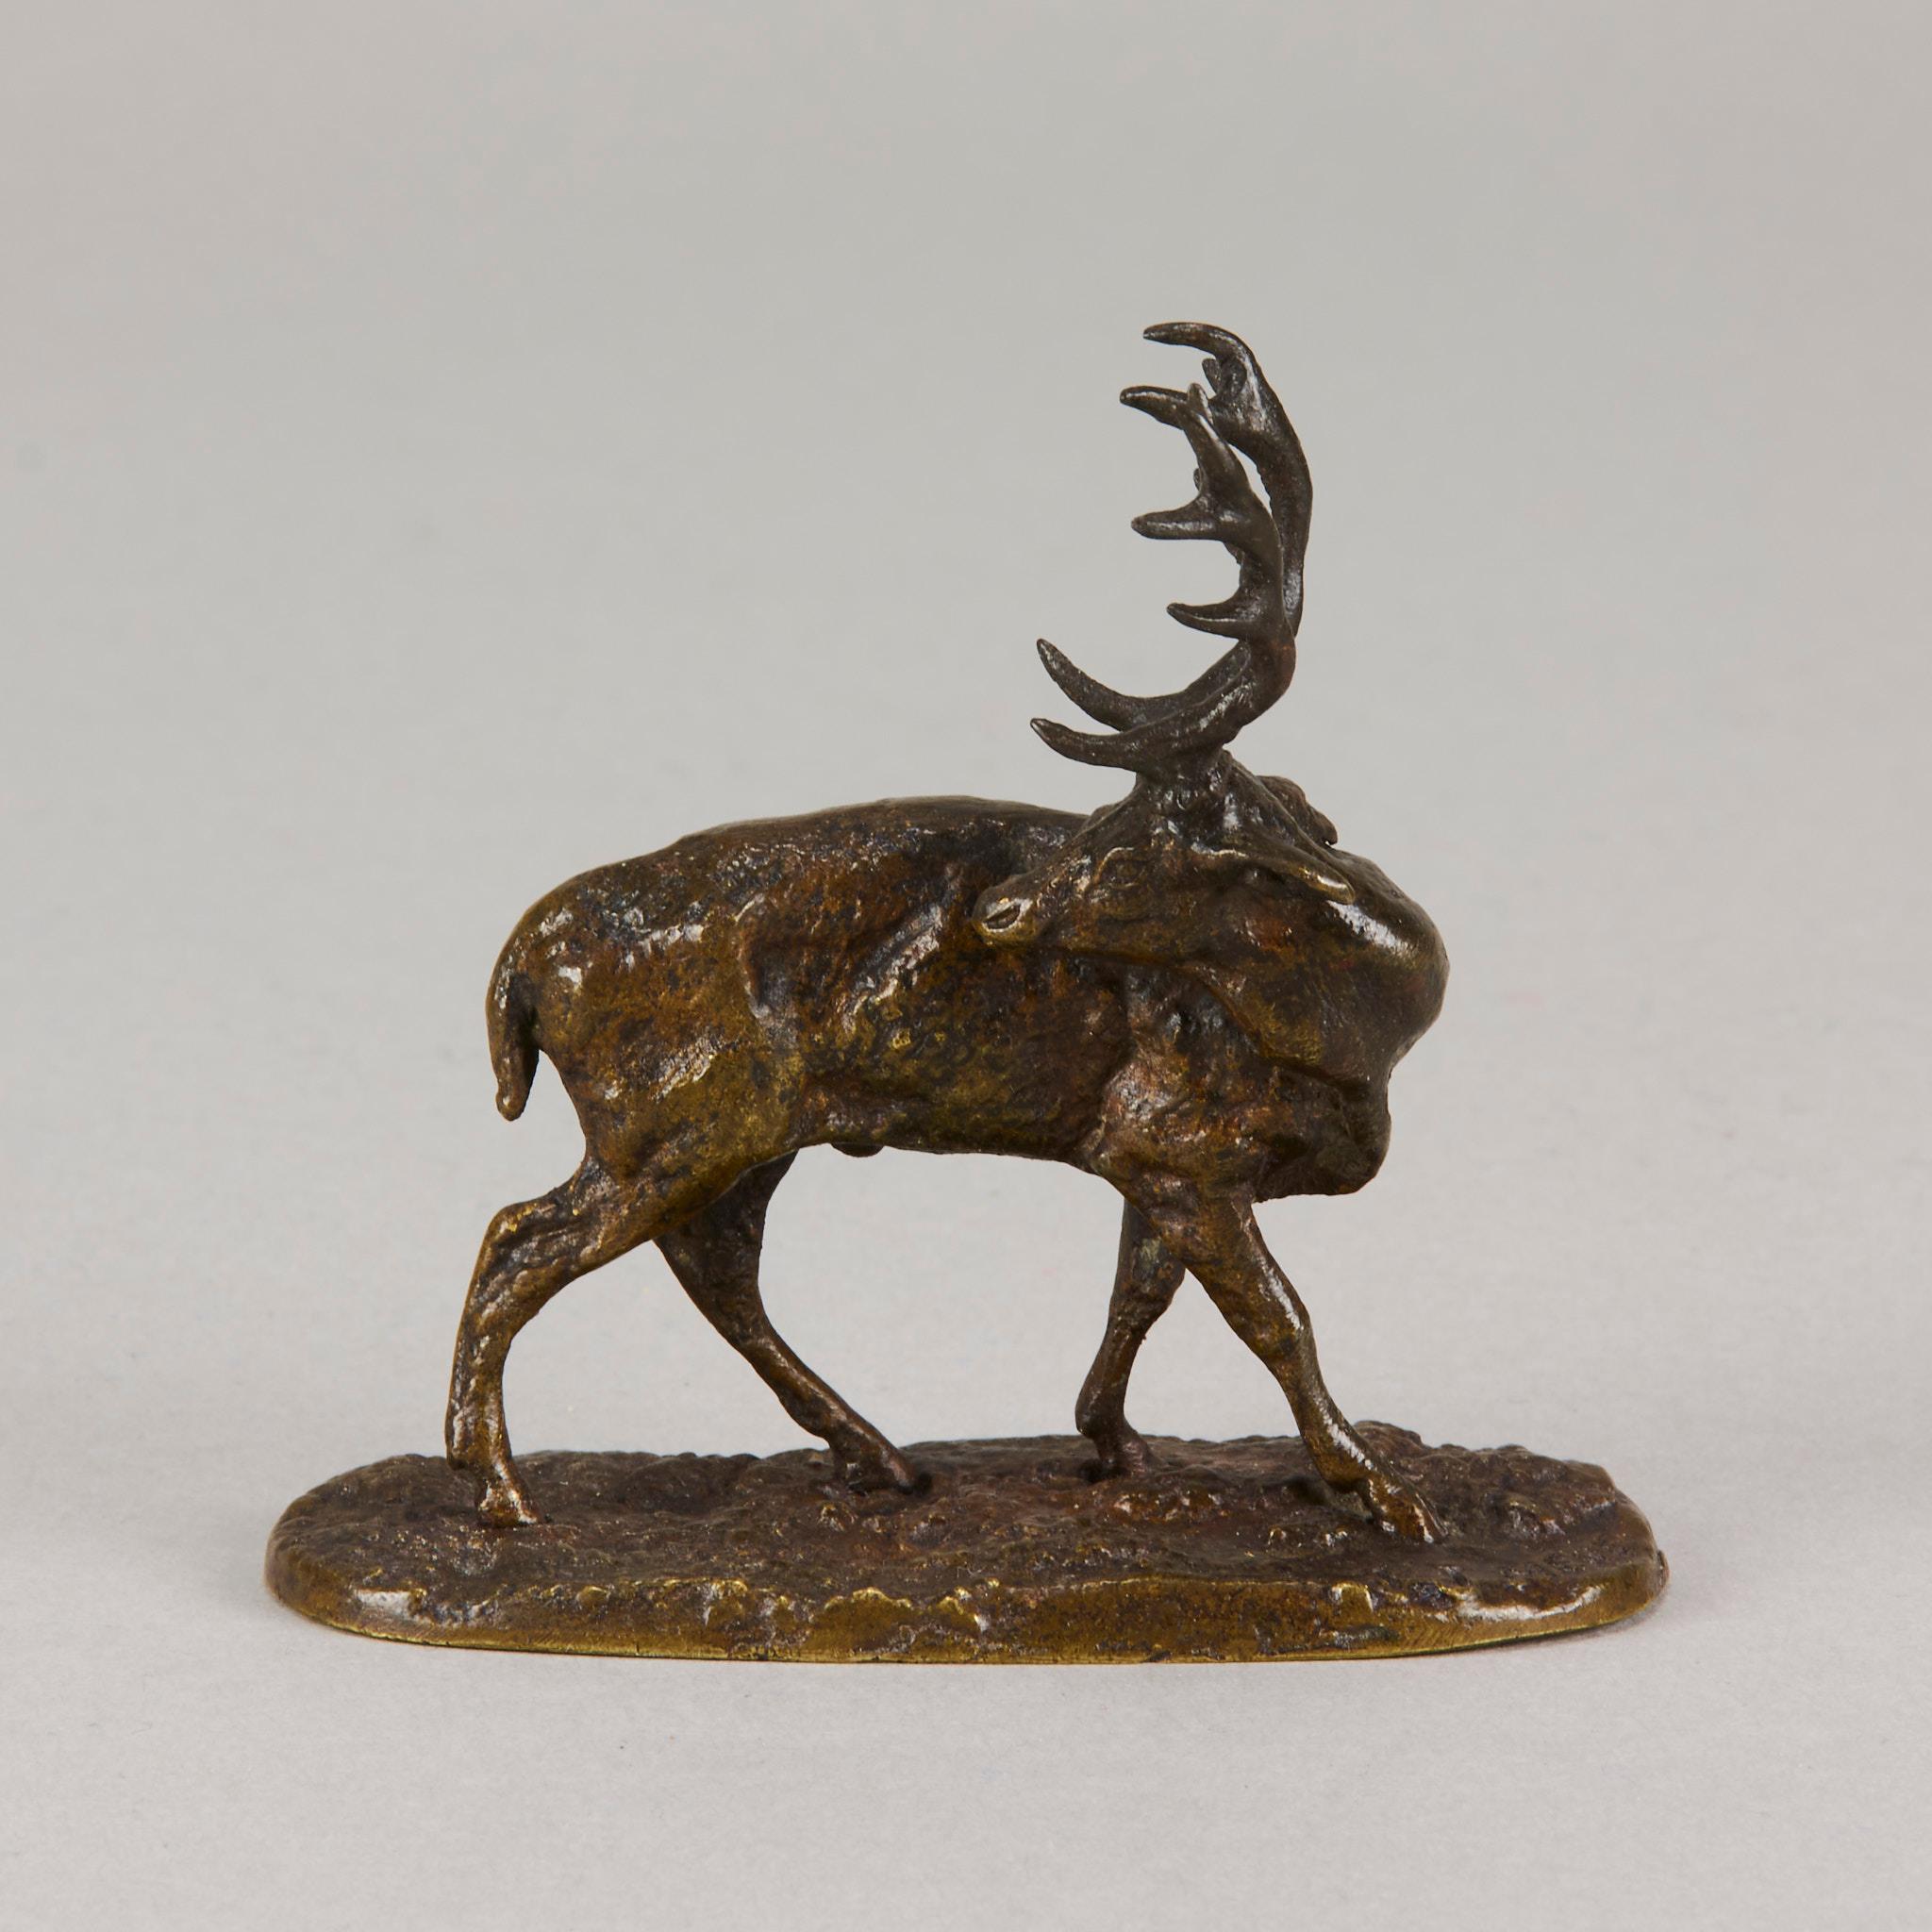 Very fine mid 19th century French animalier miniature bronze study of a standing stag with head turned looking behind. The bronze with good textured surface and fine rich brown lightly rubbed to golden brown patina, raised on a naturalistic base and